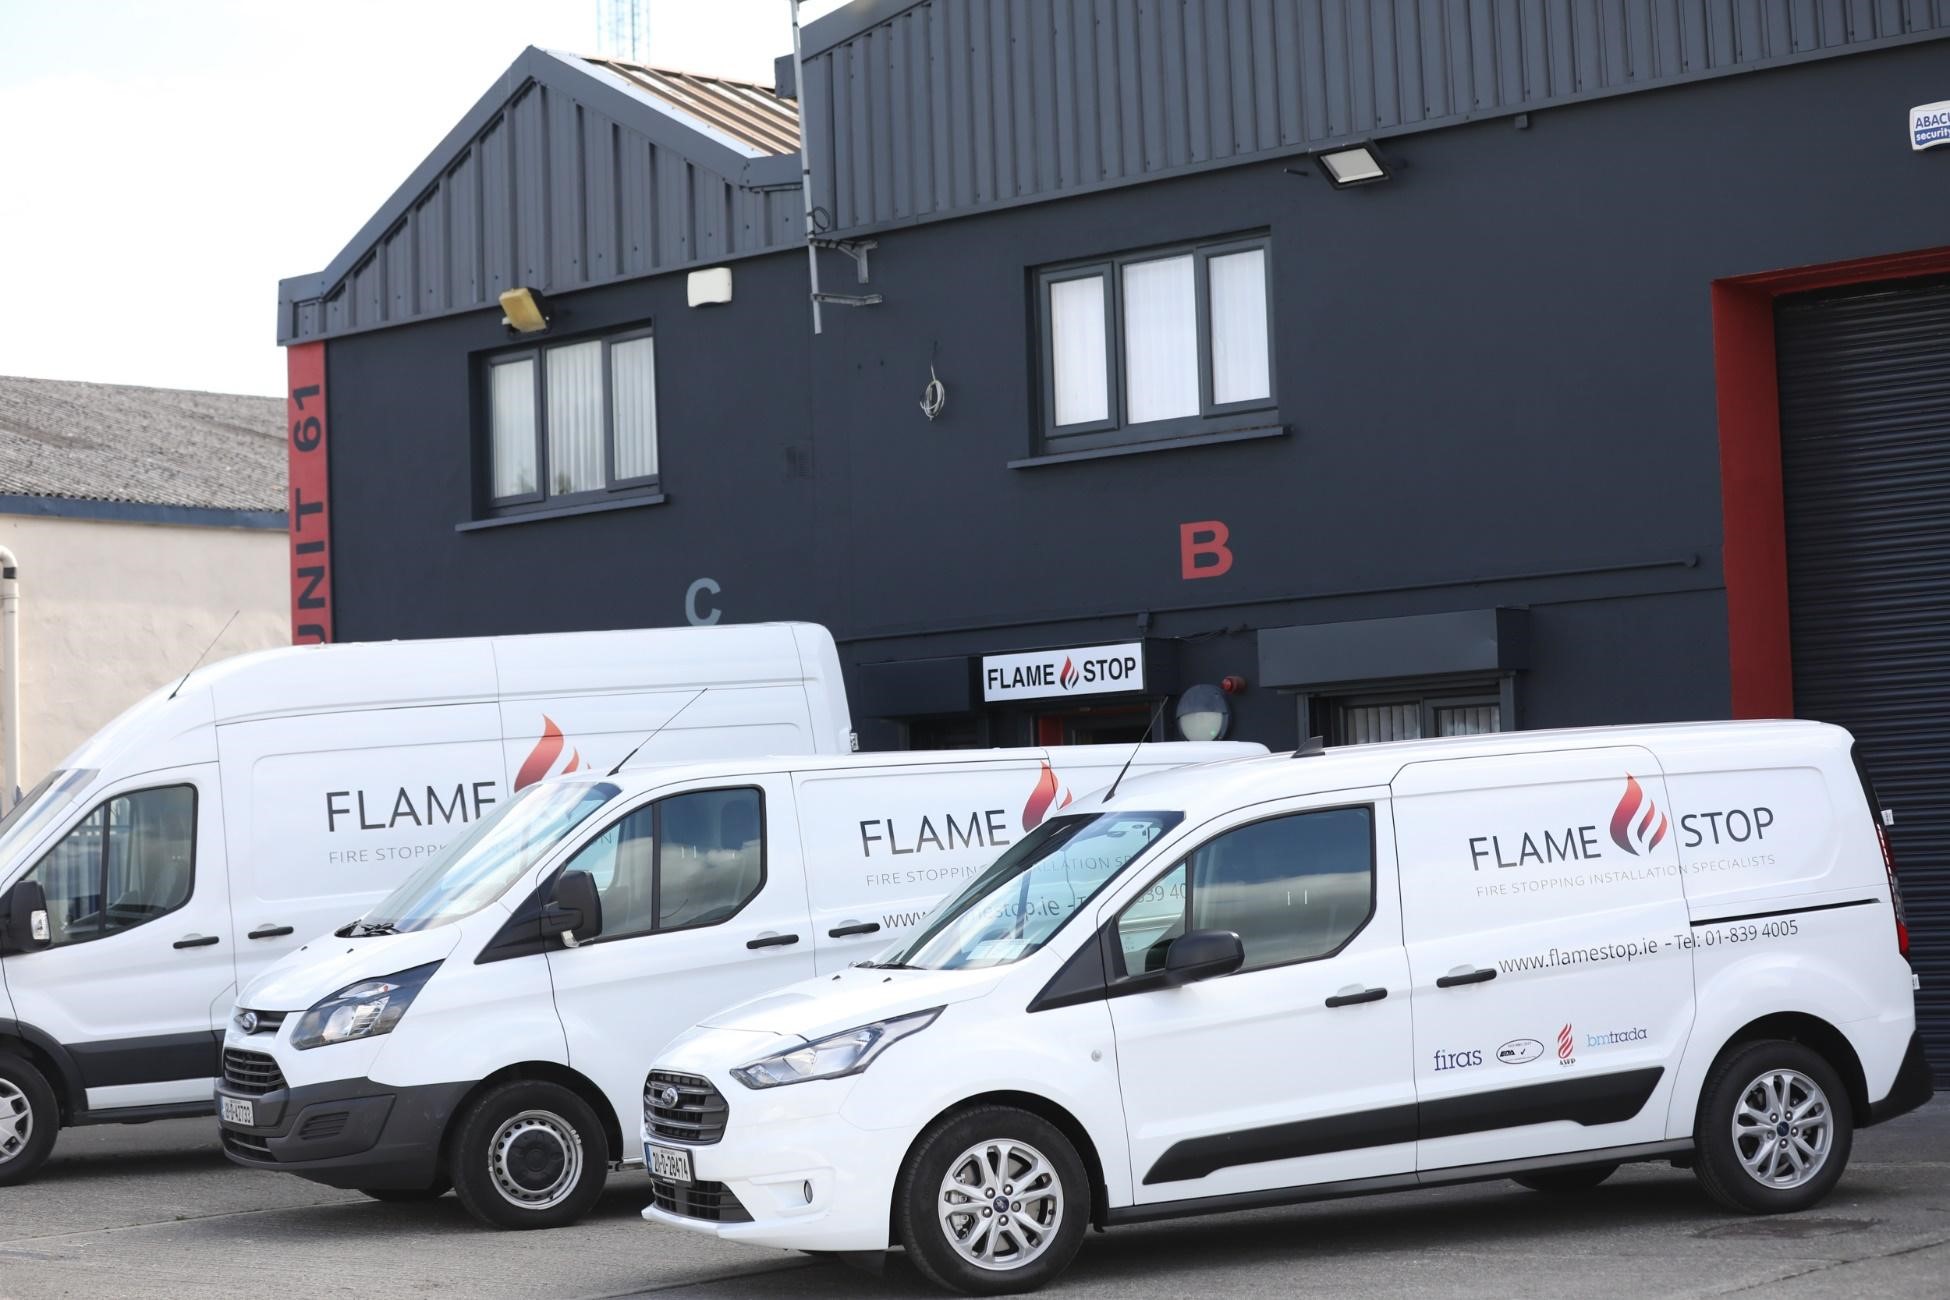 Our New Headquarters - Flame Stop Ltd